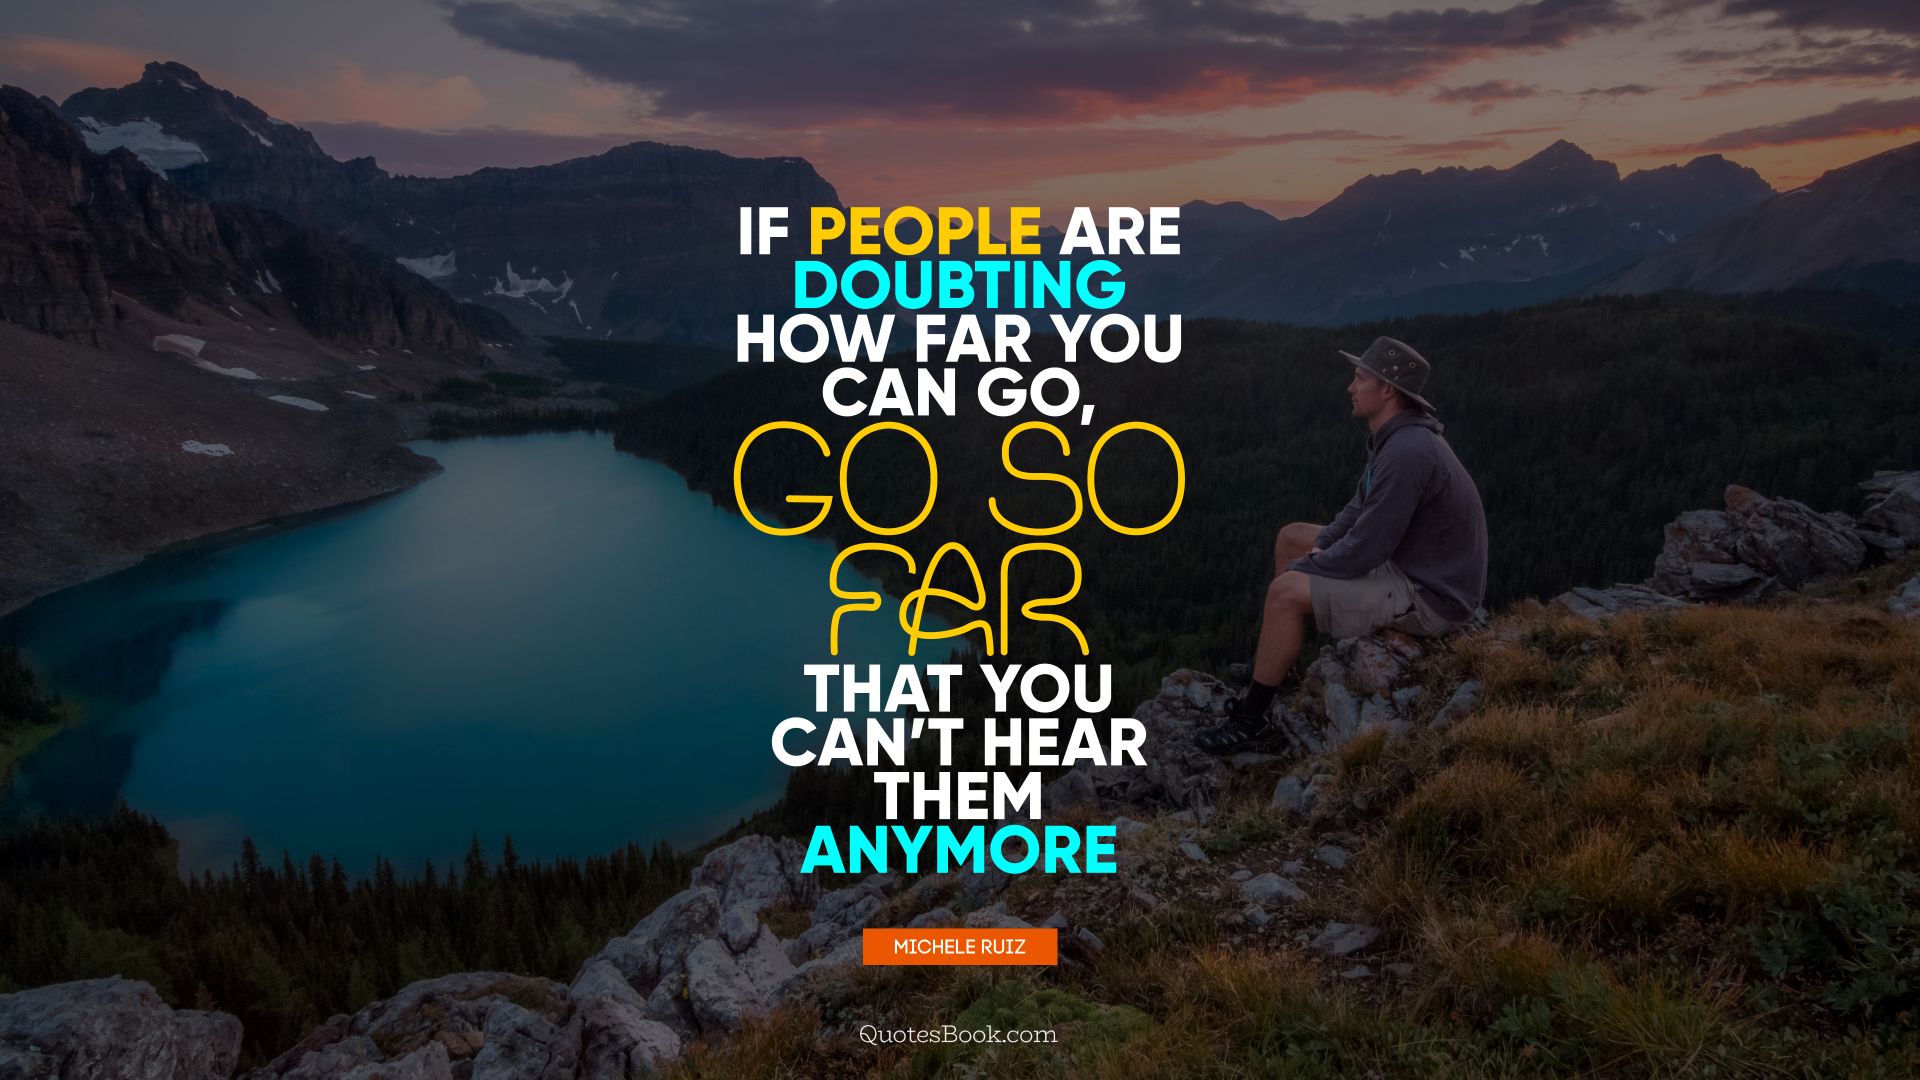 If people are doubting how far you can go, go so far that you can’t hear them anymore. - Quote by Michele Ruiz